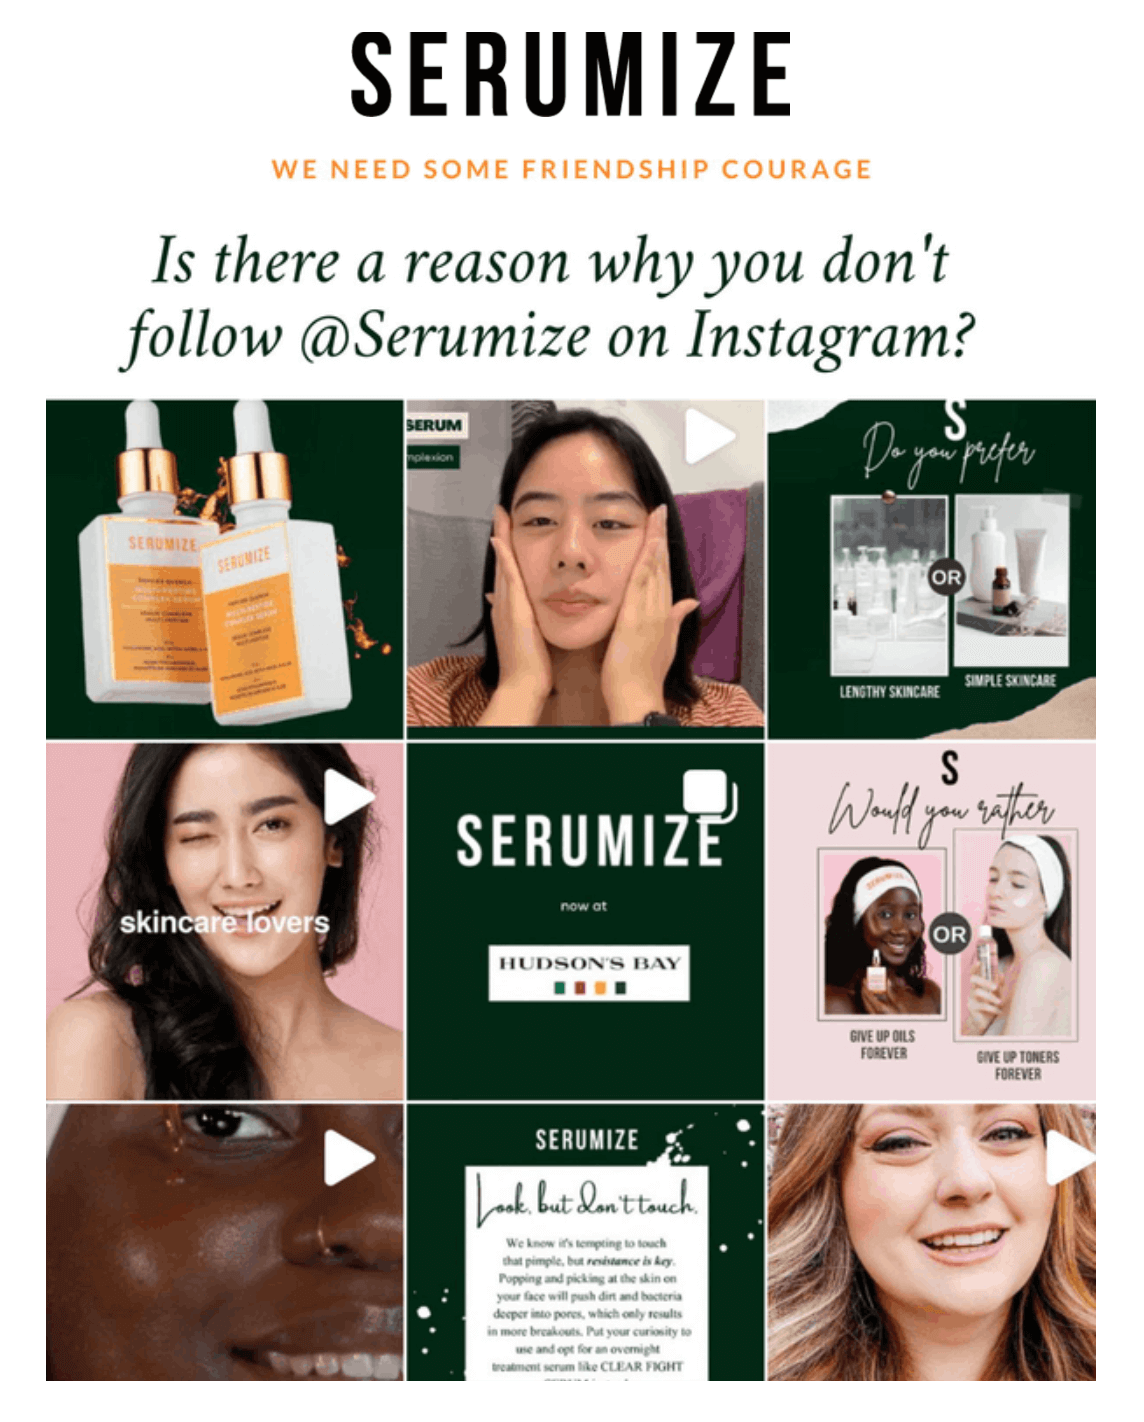 Serumize Instagram and email marketing campaign